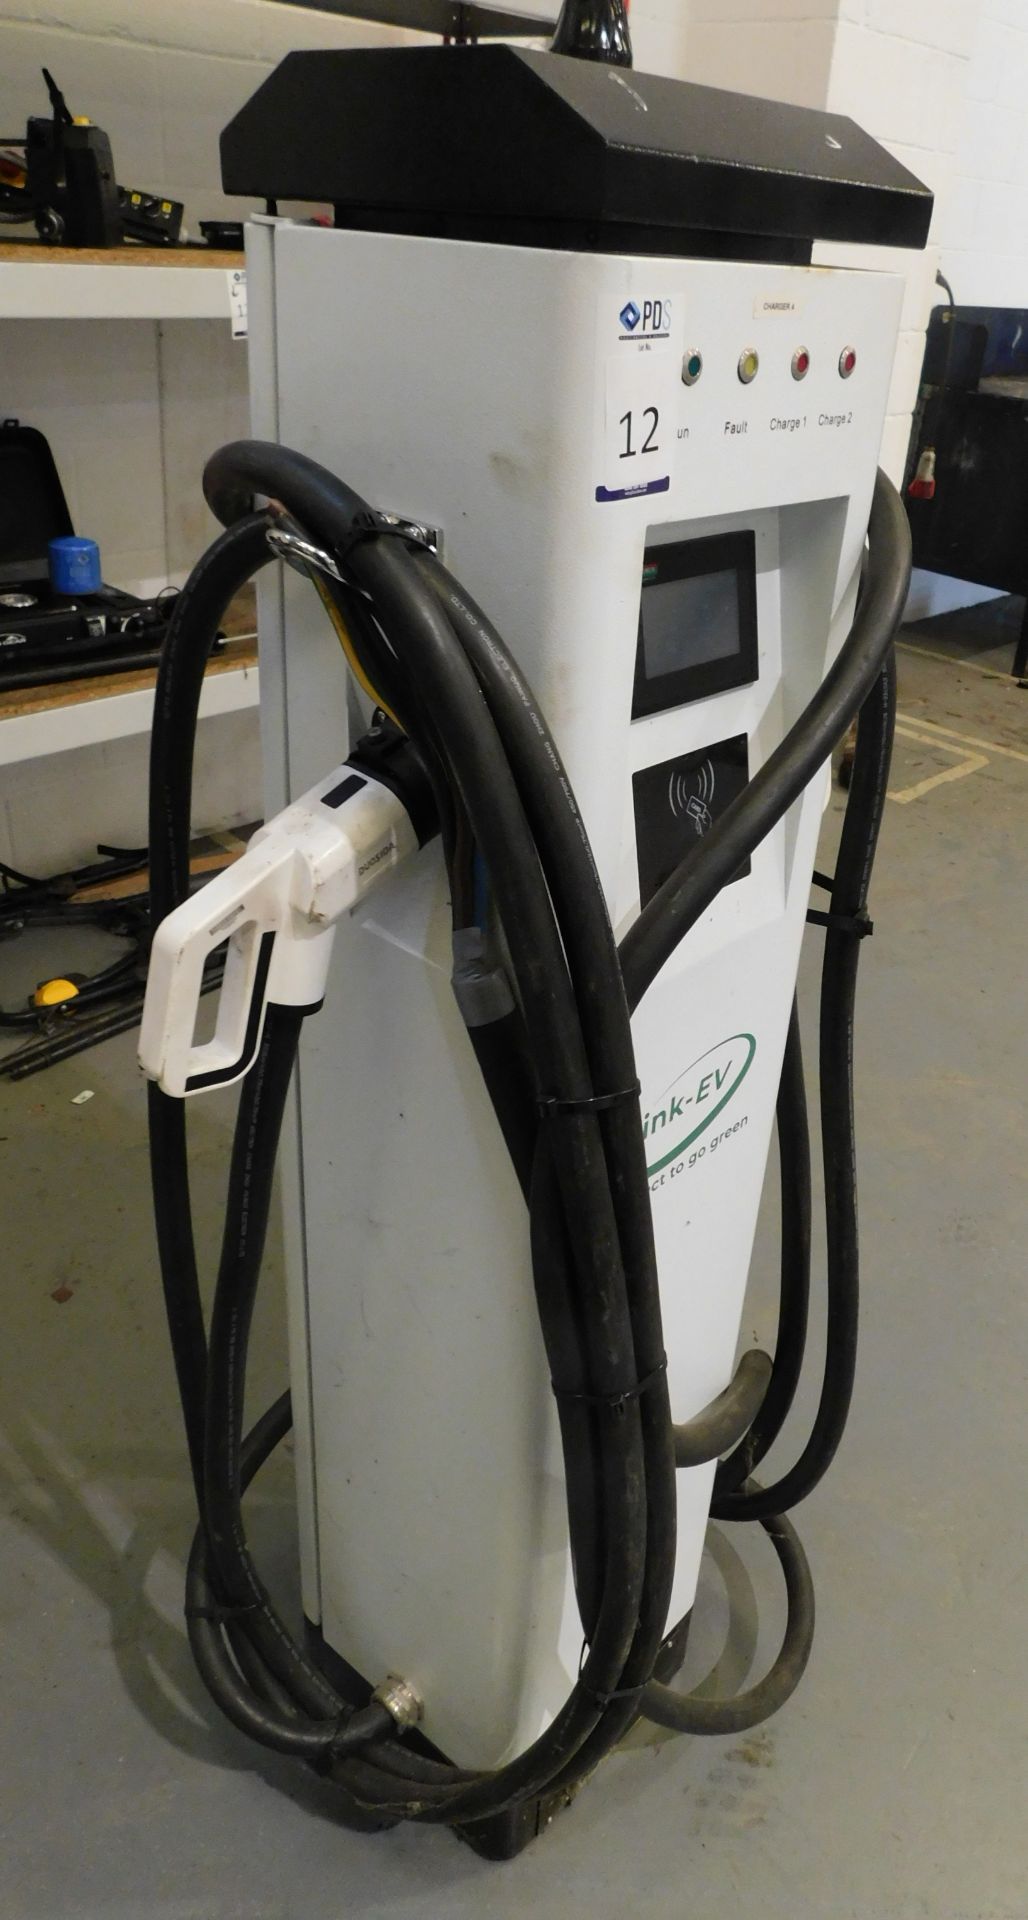 Think EV Freestanding Charging Tower (Located Rugby. Please Refer to General Notes) - Image 2 of 6